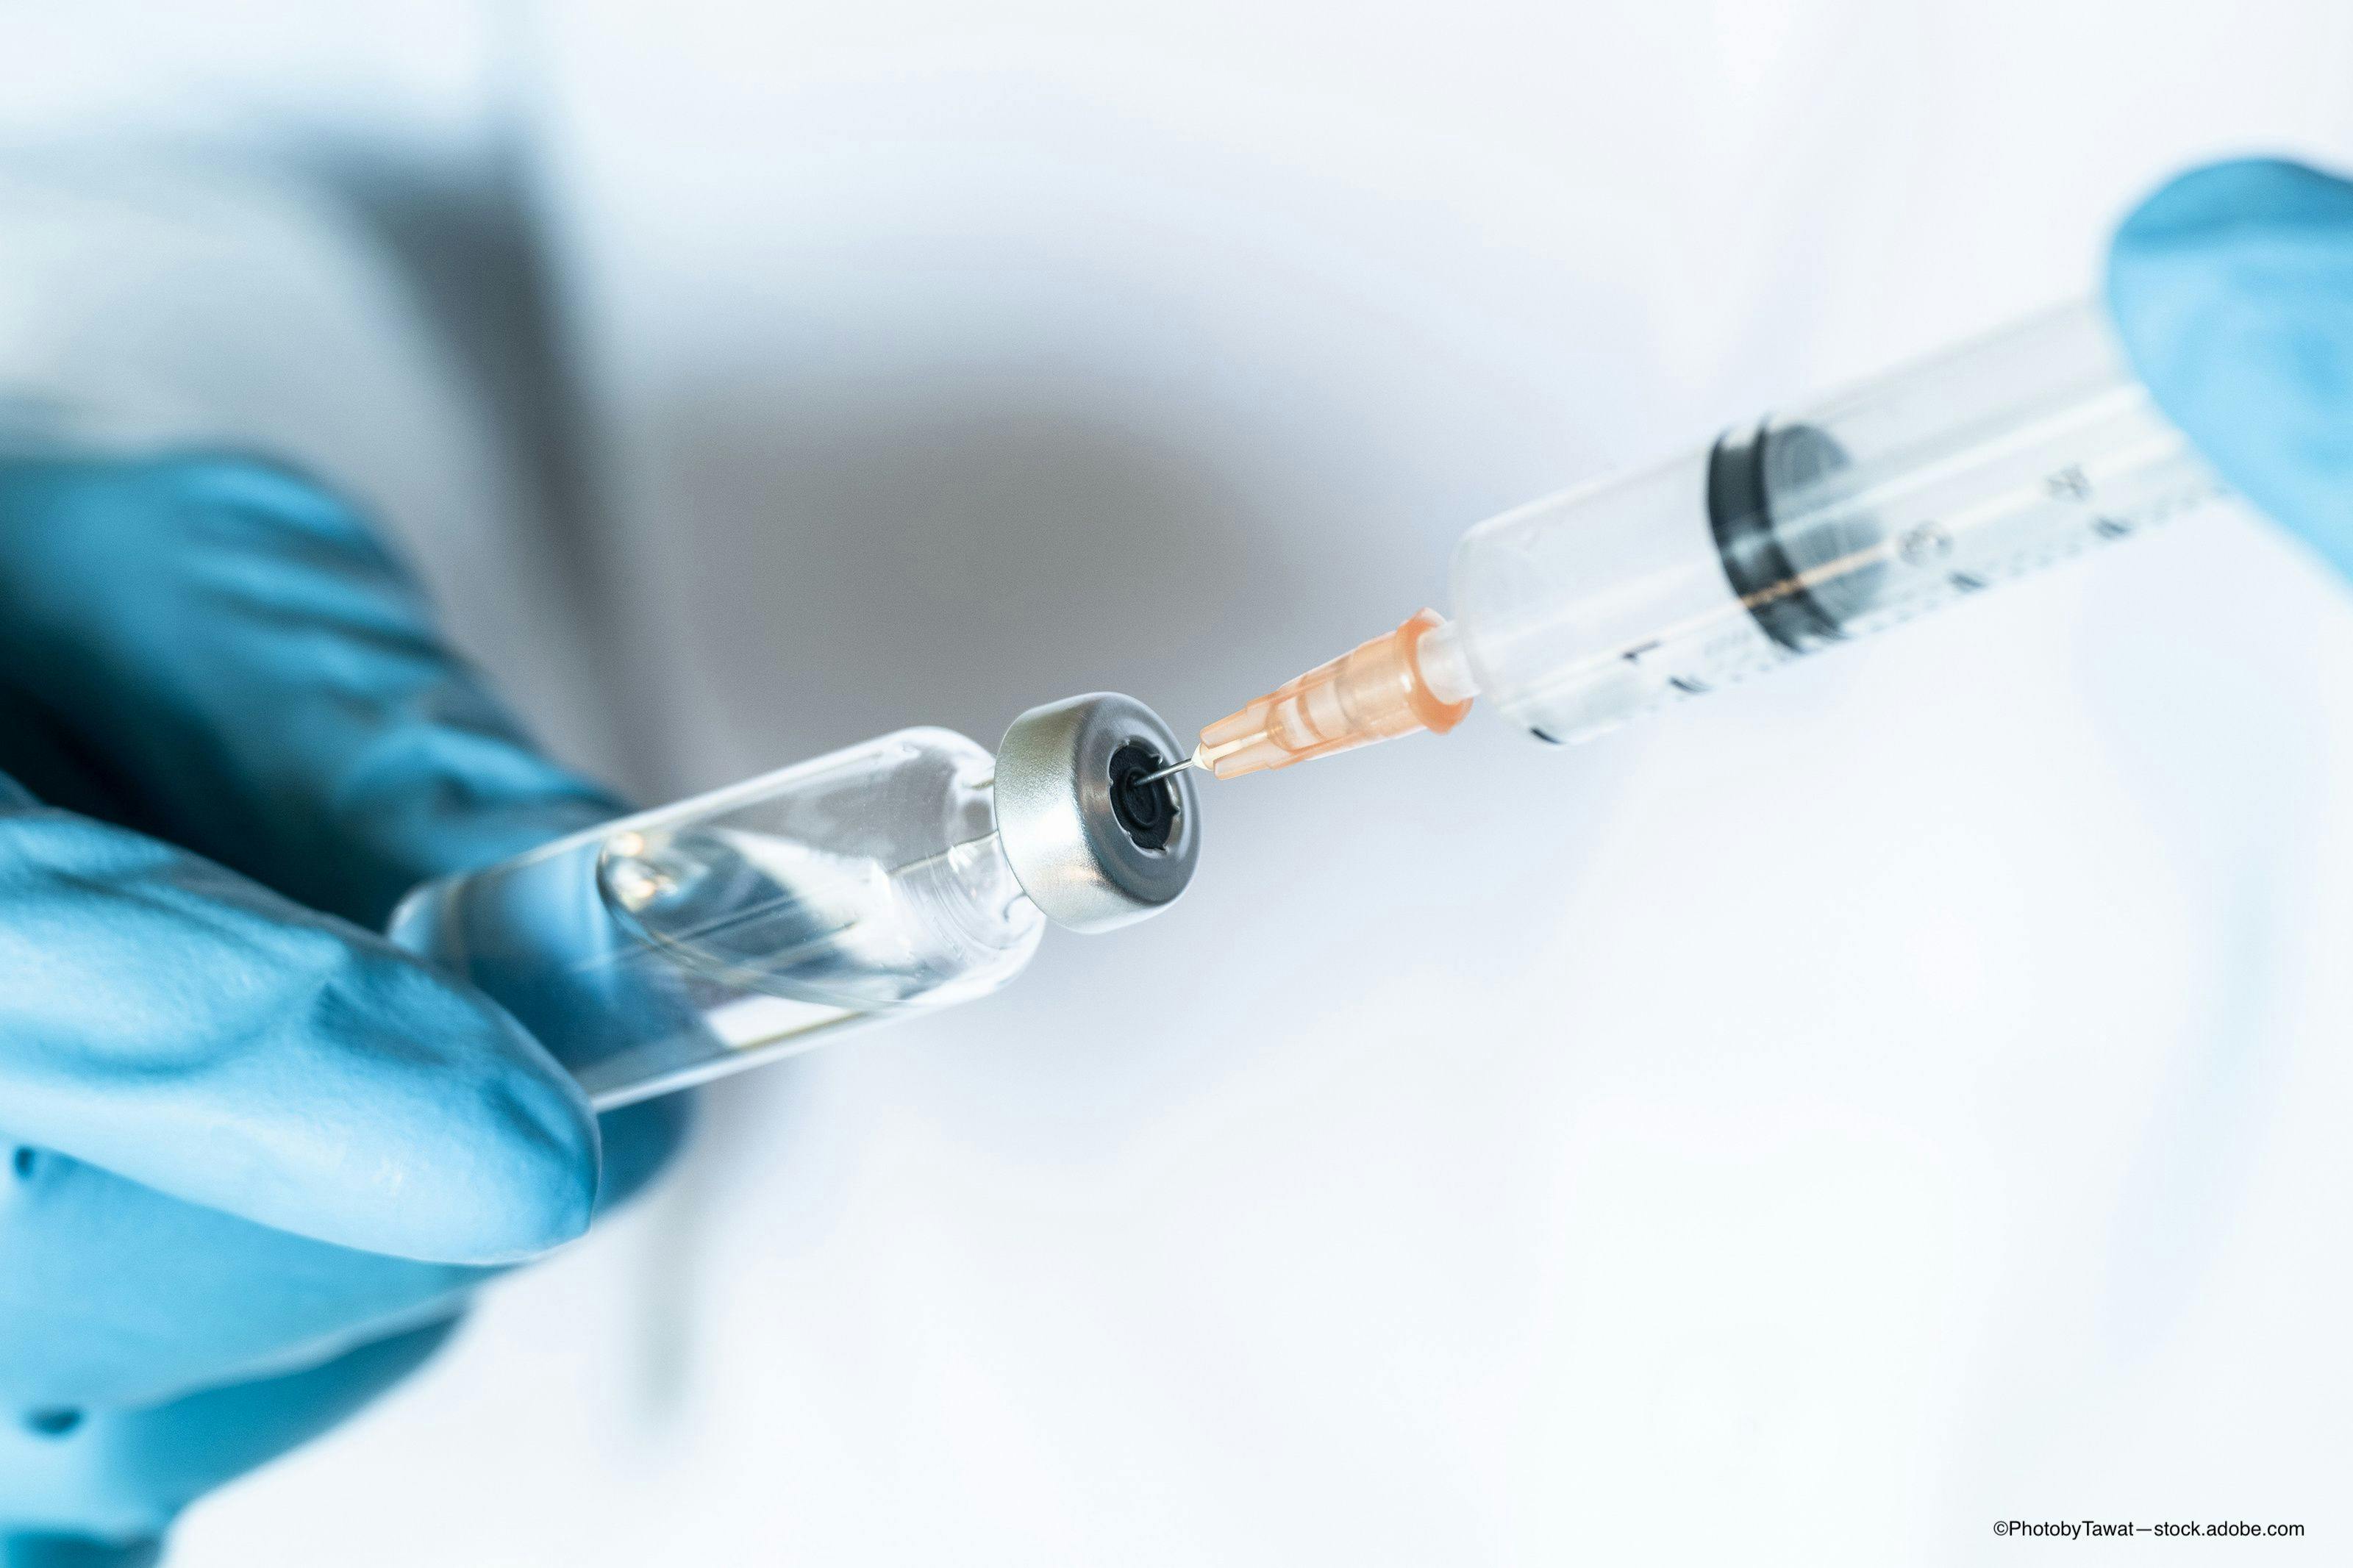 Study evaluates periodic aflibercept injections in NPDR treatment